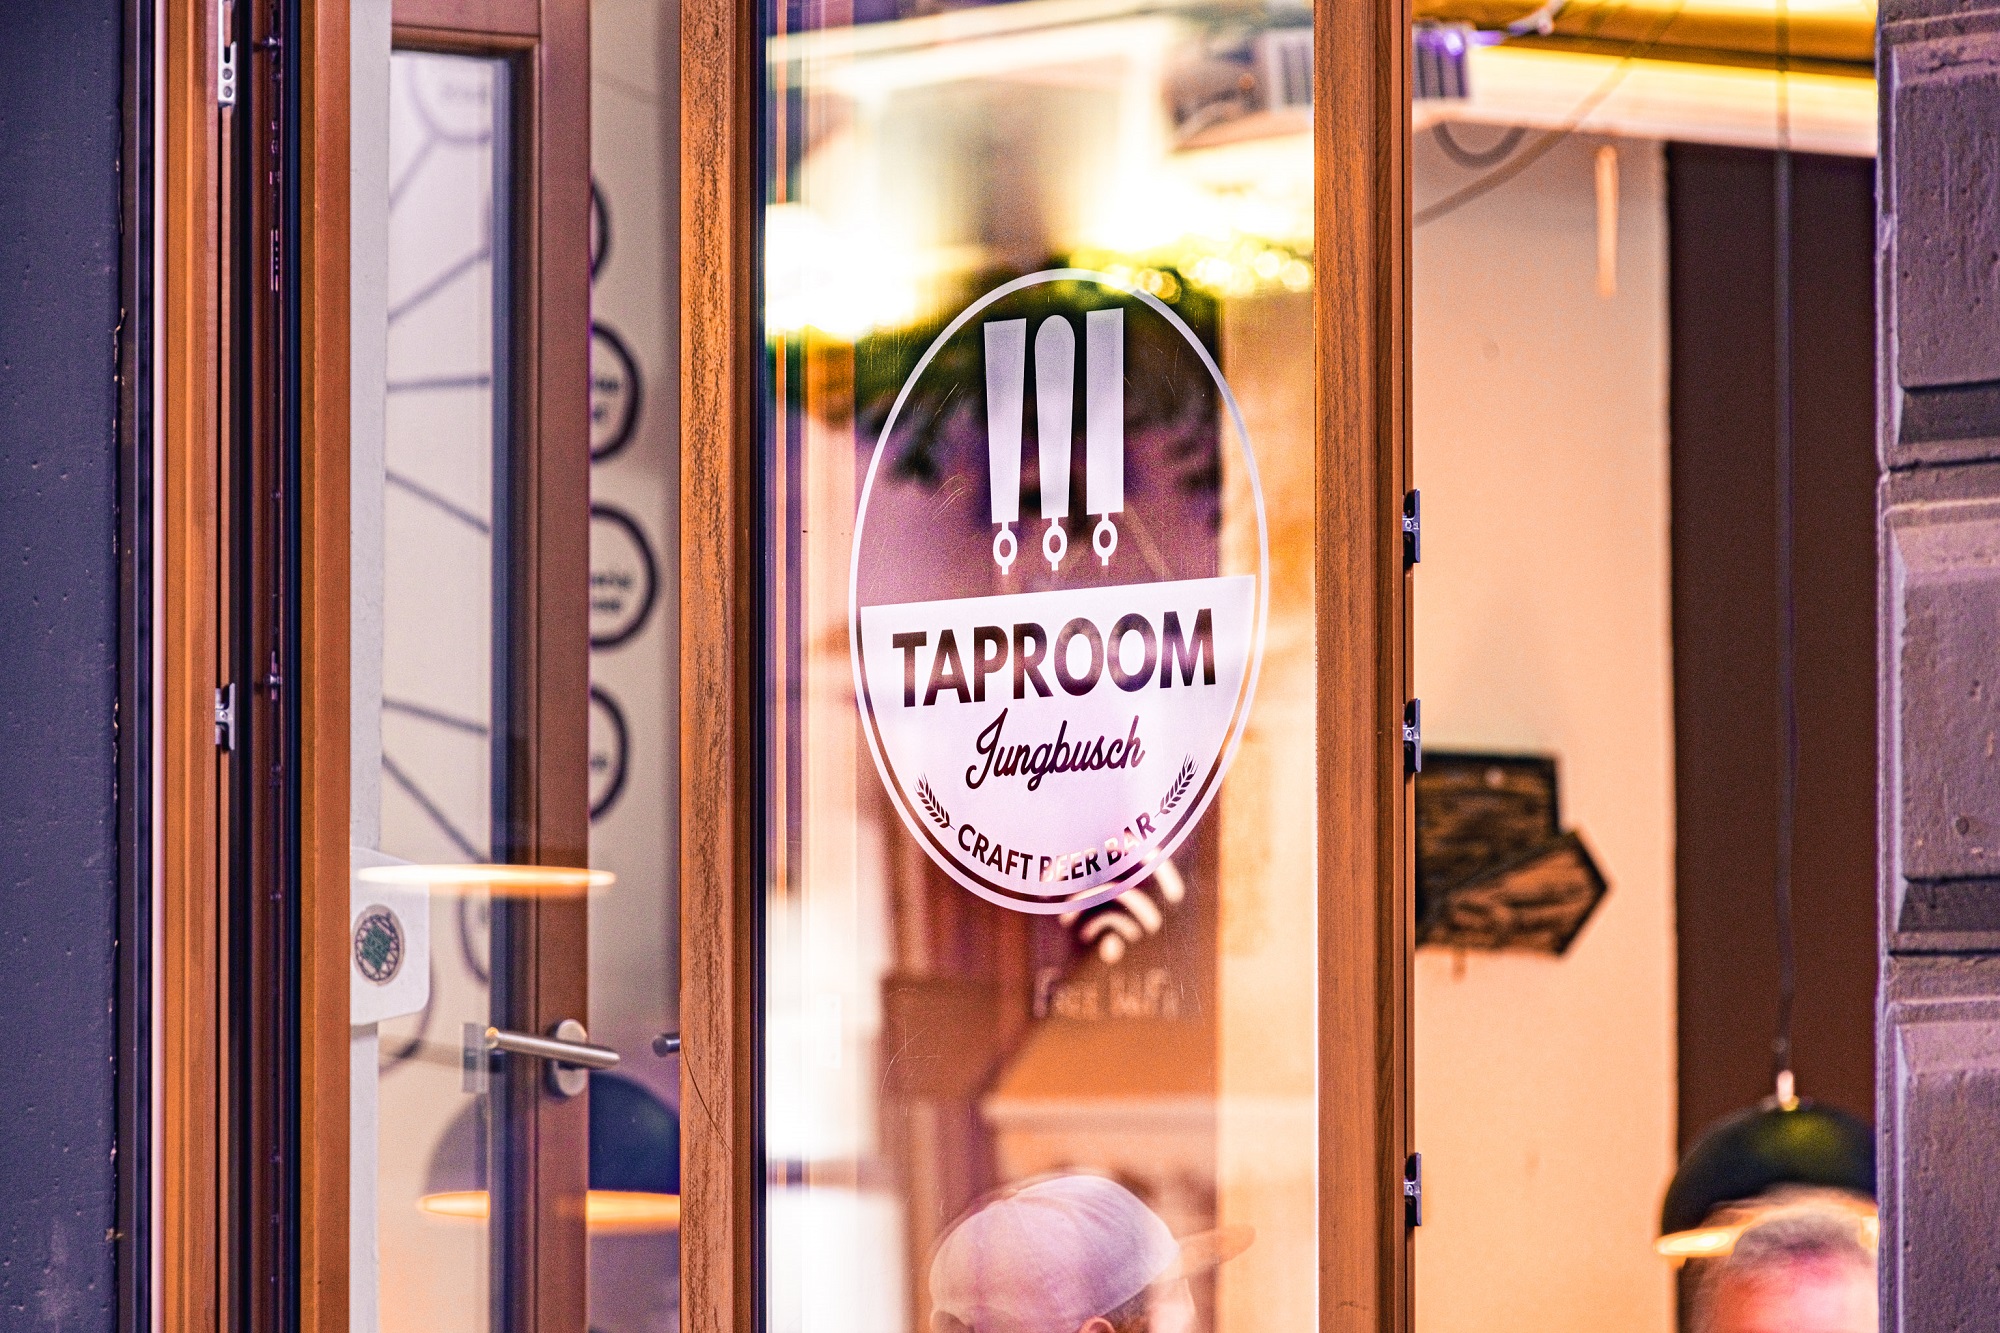 Exterior view of taproom logo in shop window